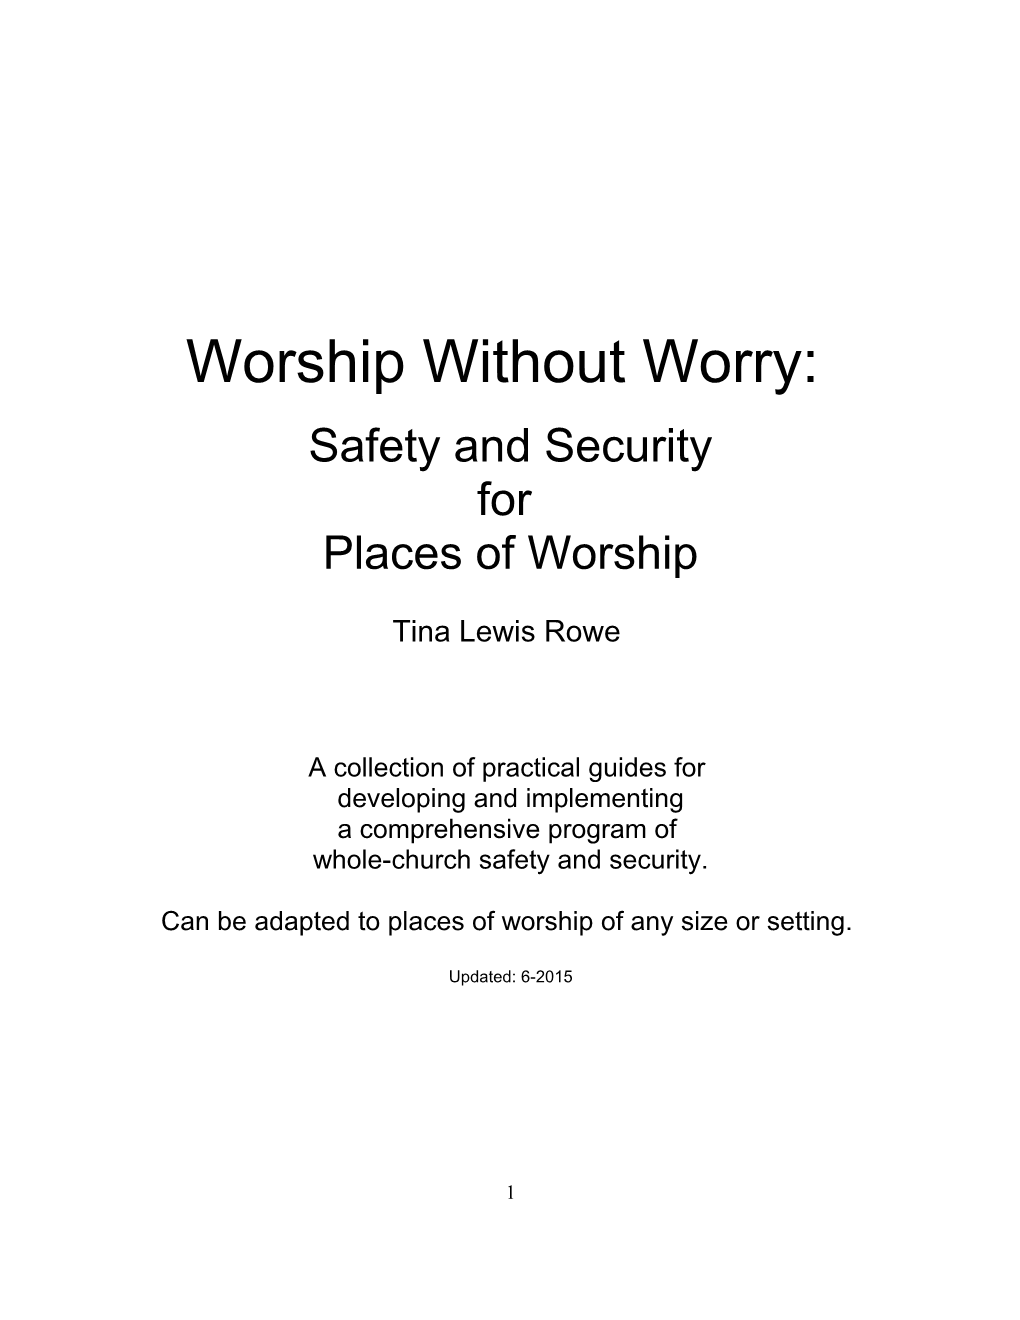 Worship Without Worry